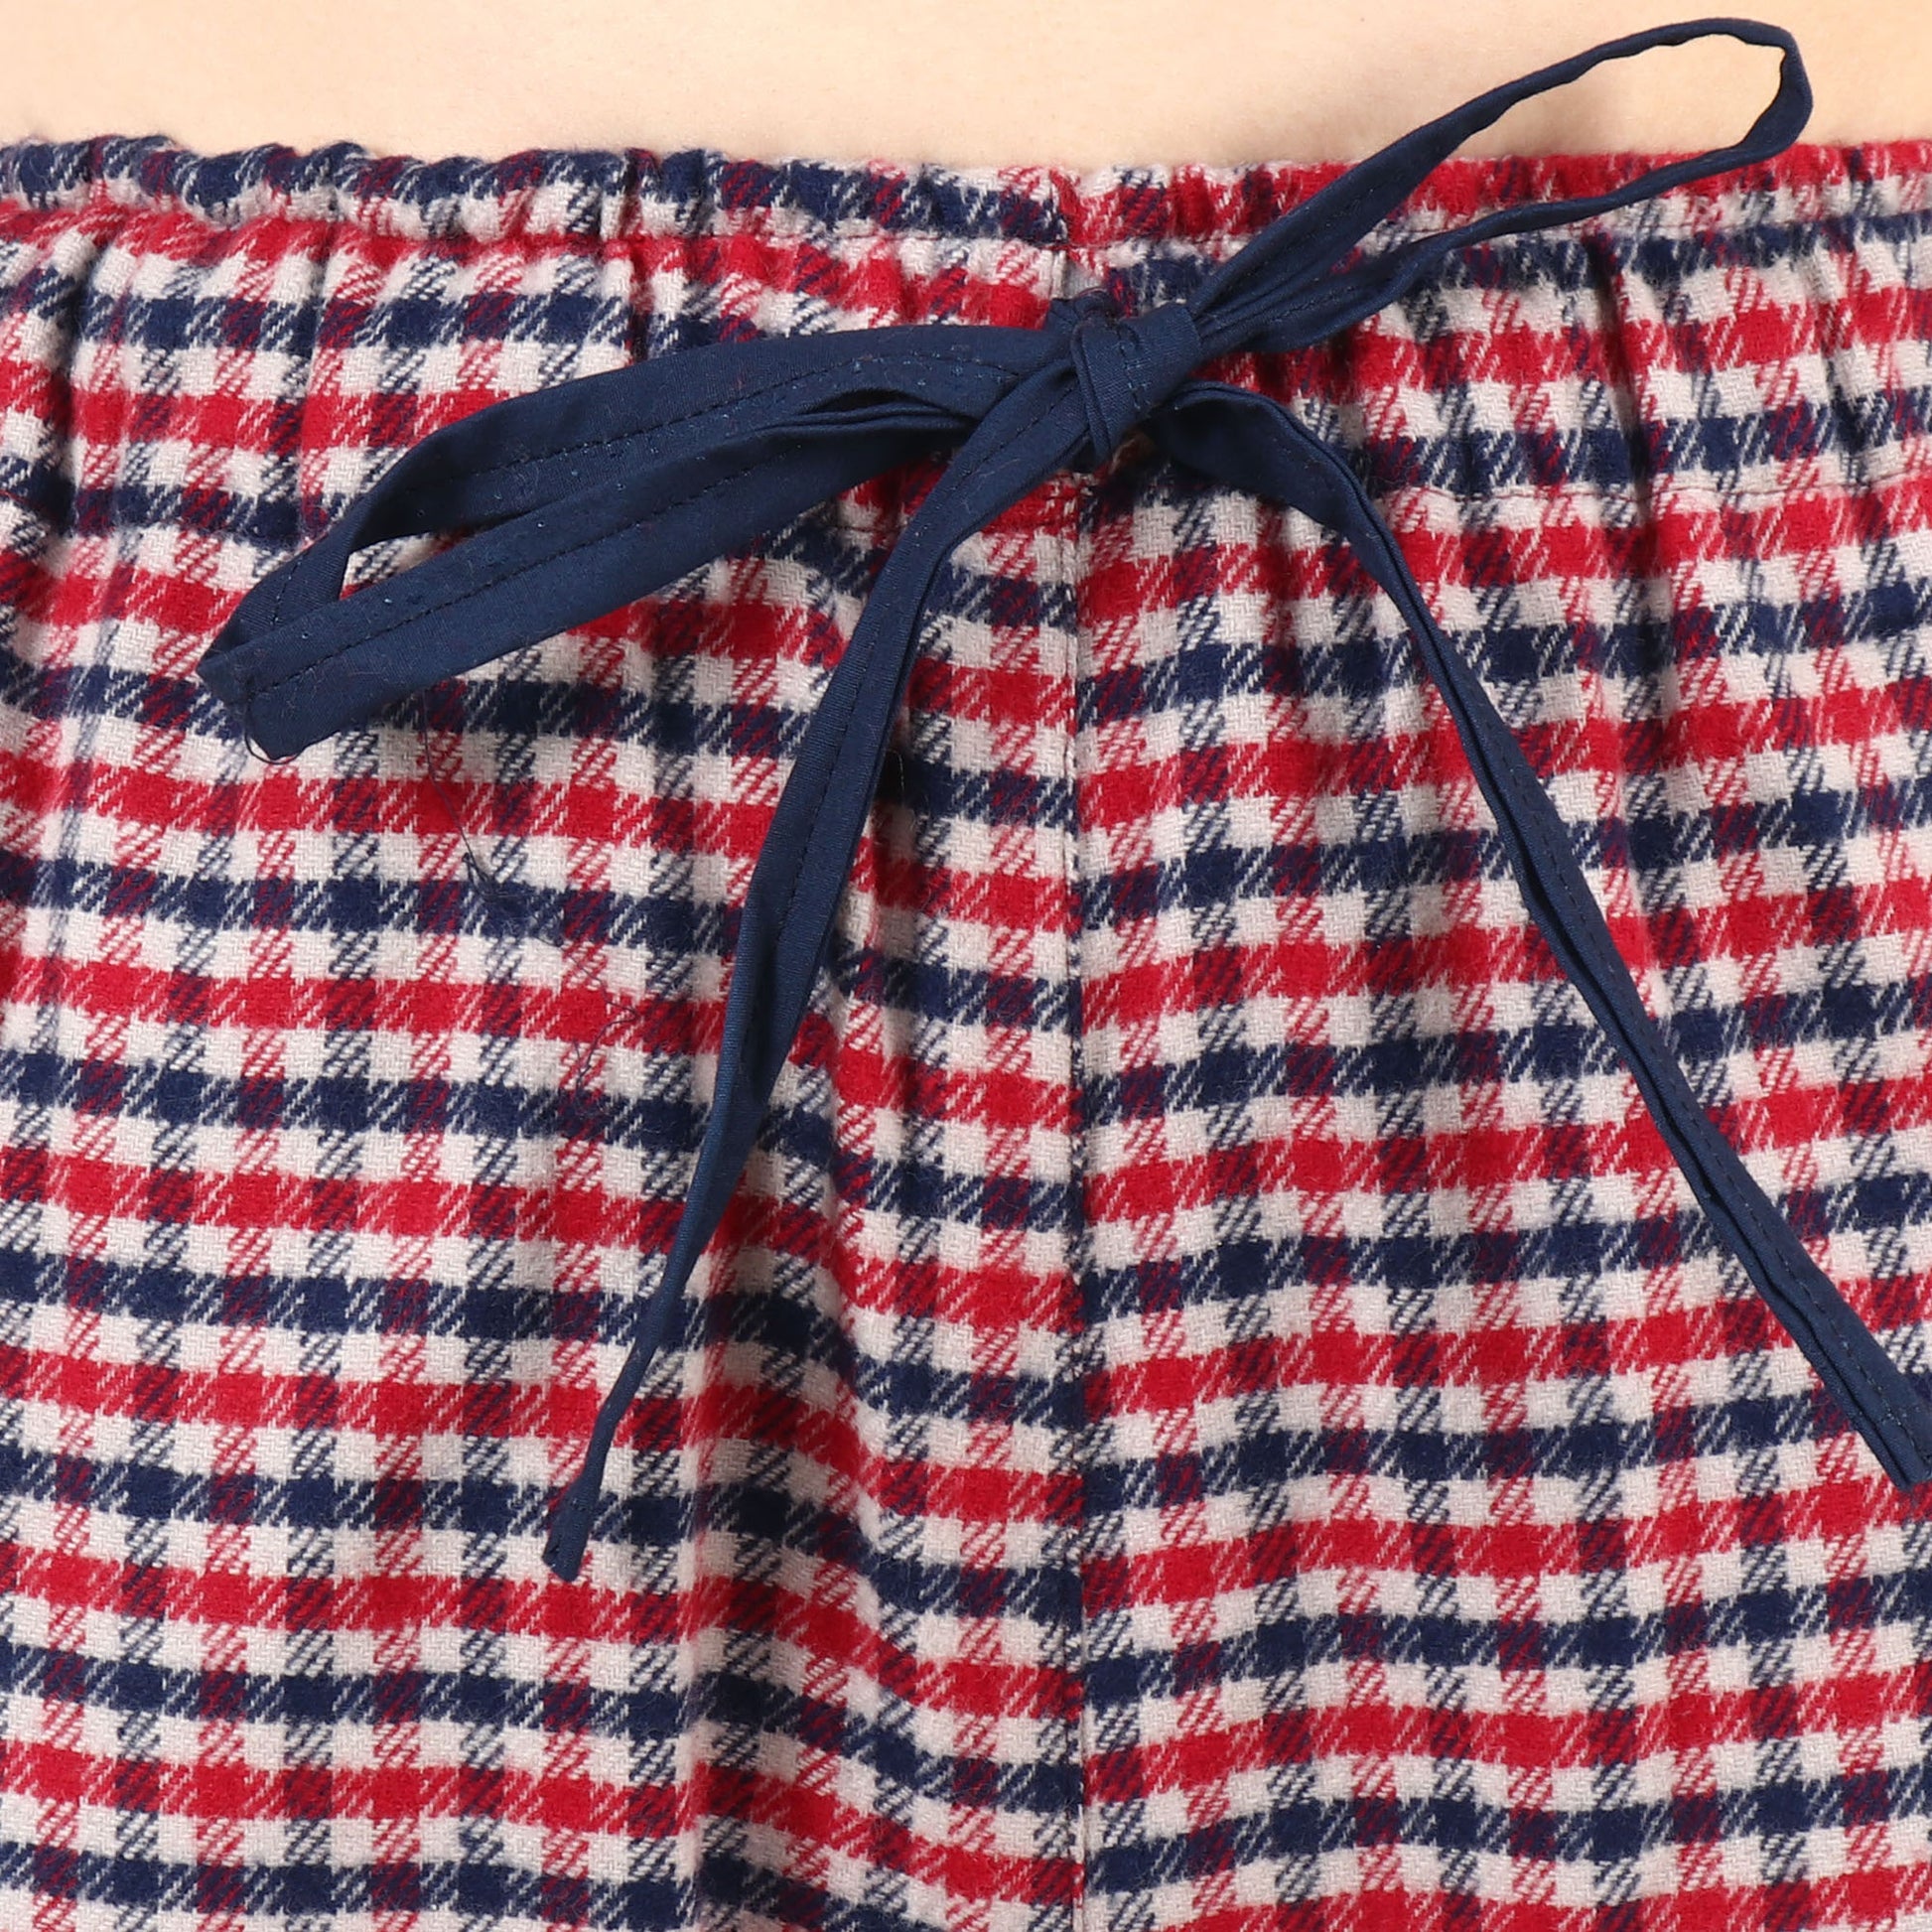 Women Plus Size Brushed Cotton Red Checked Pajama Winter